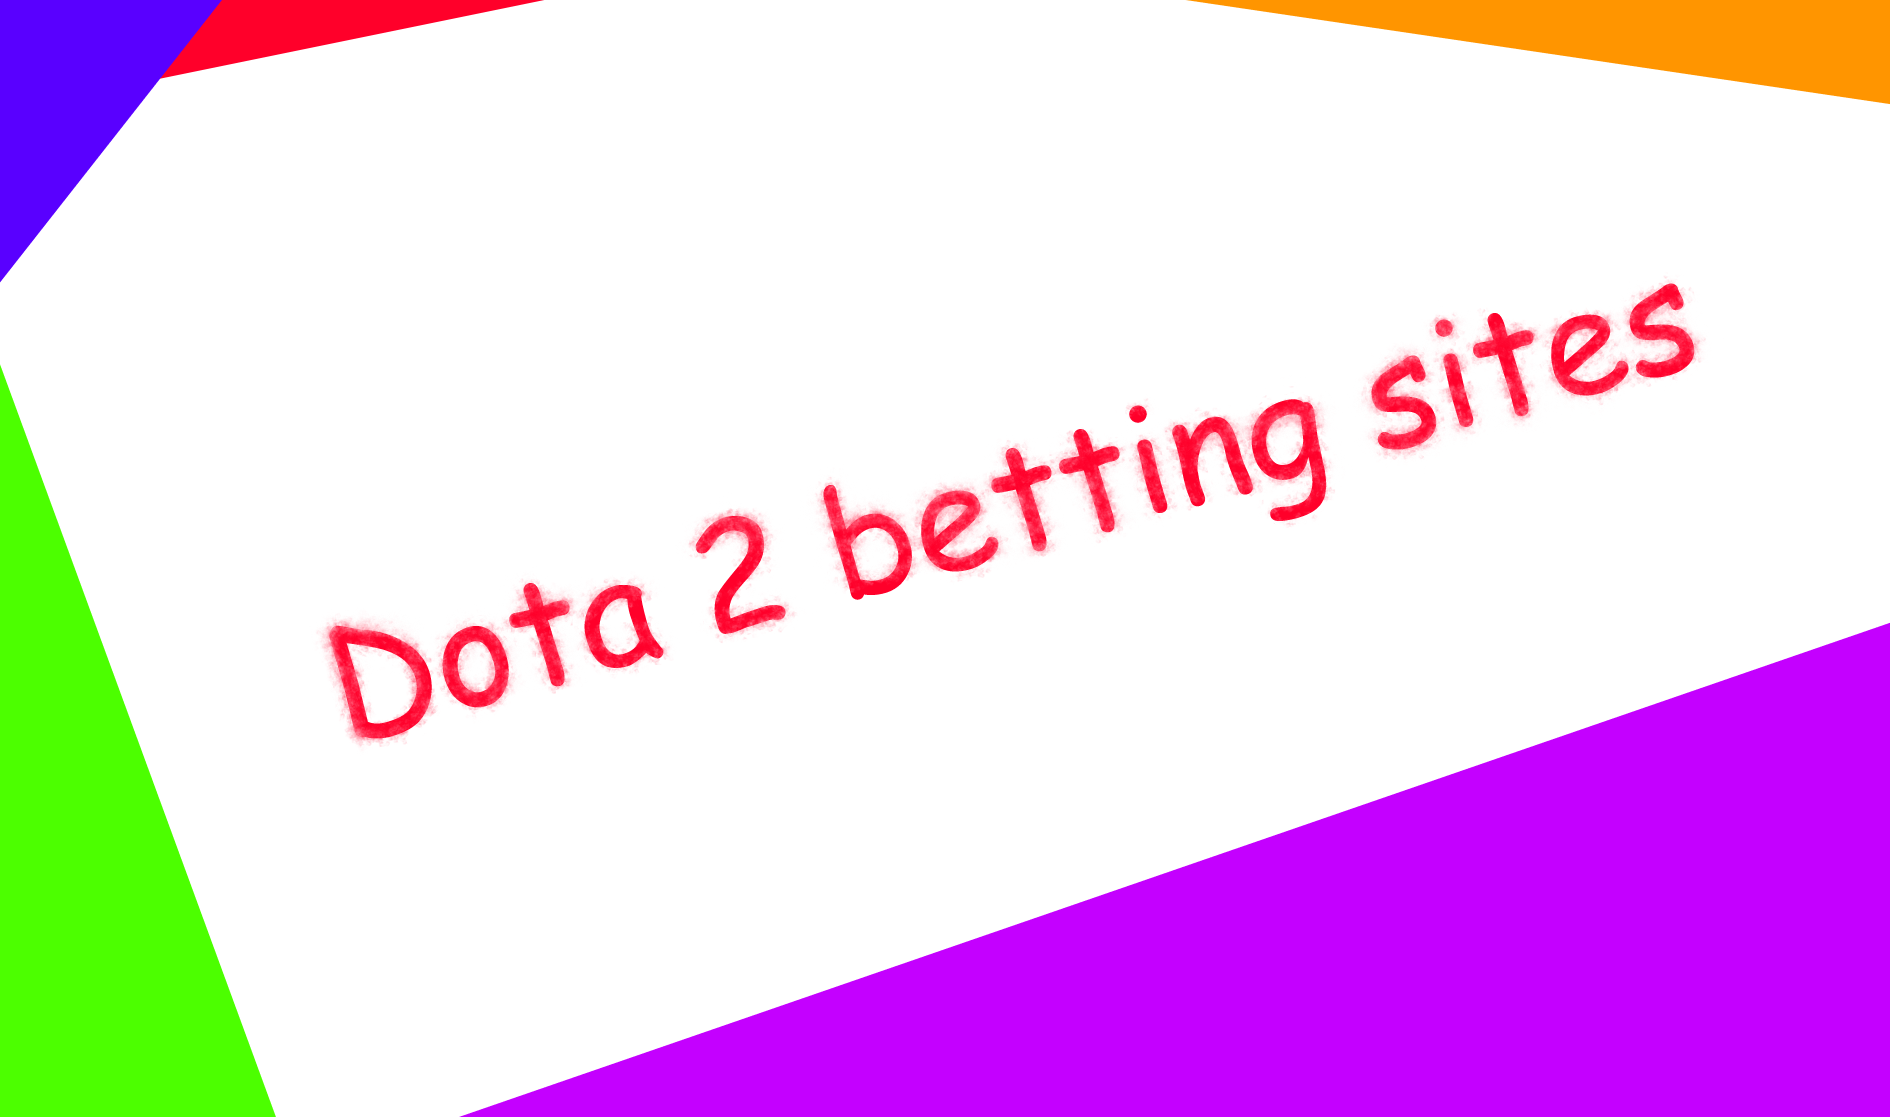 Details of Dota 2 betting sites